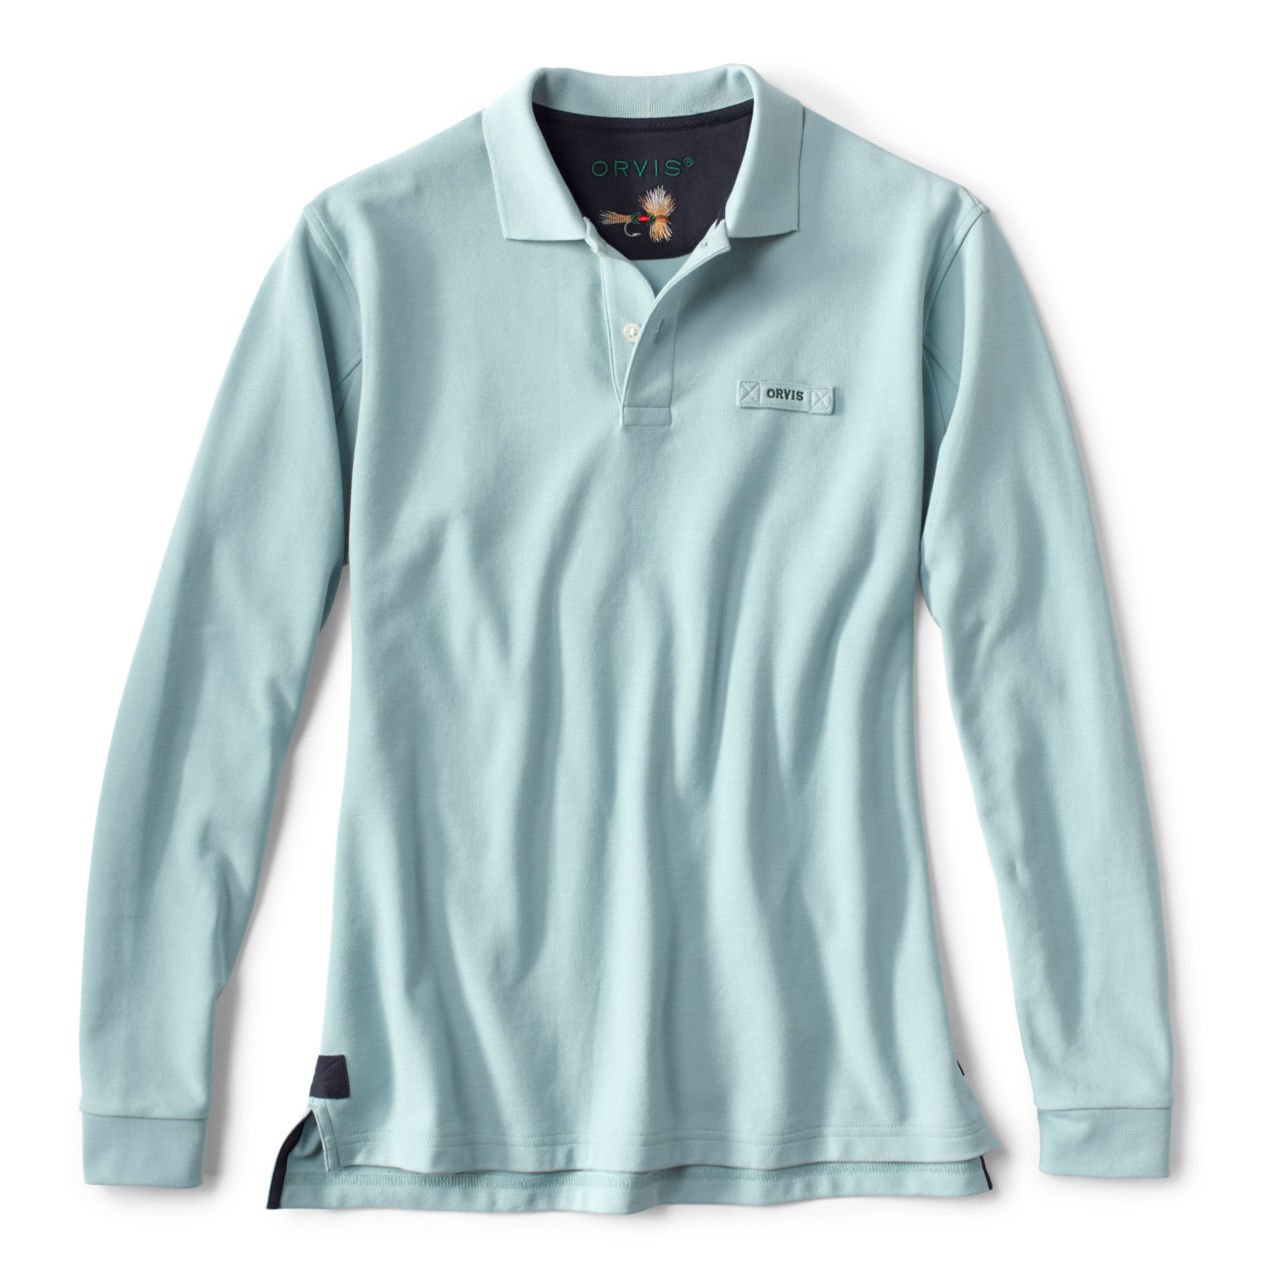 The Orvis Signature Long-Sleeved Polo - MINERAL BLUE image number 0